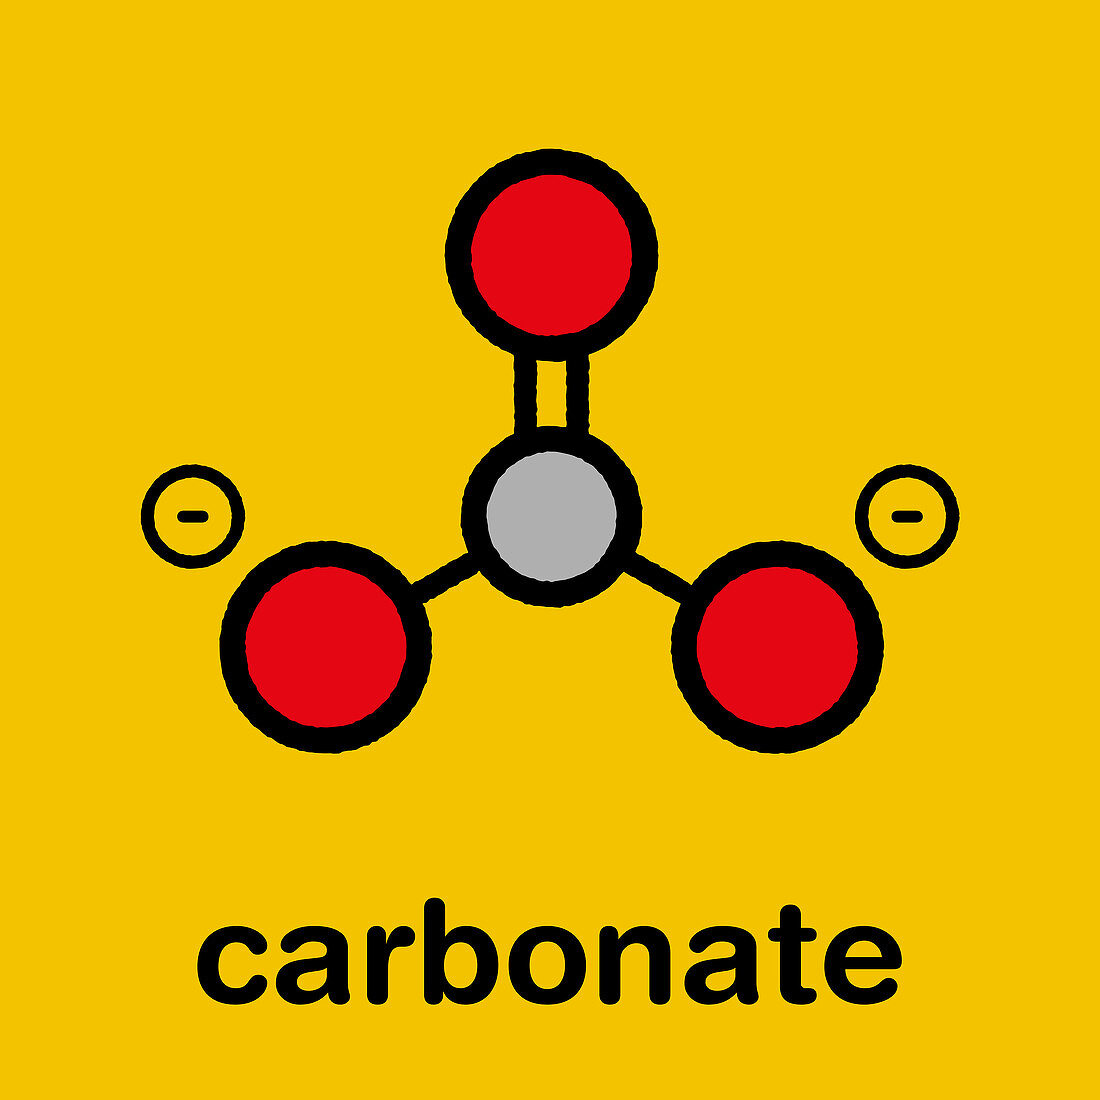 Carbonate anion chemical structure, illustration